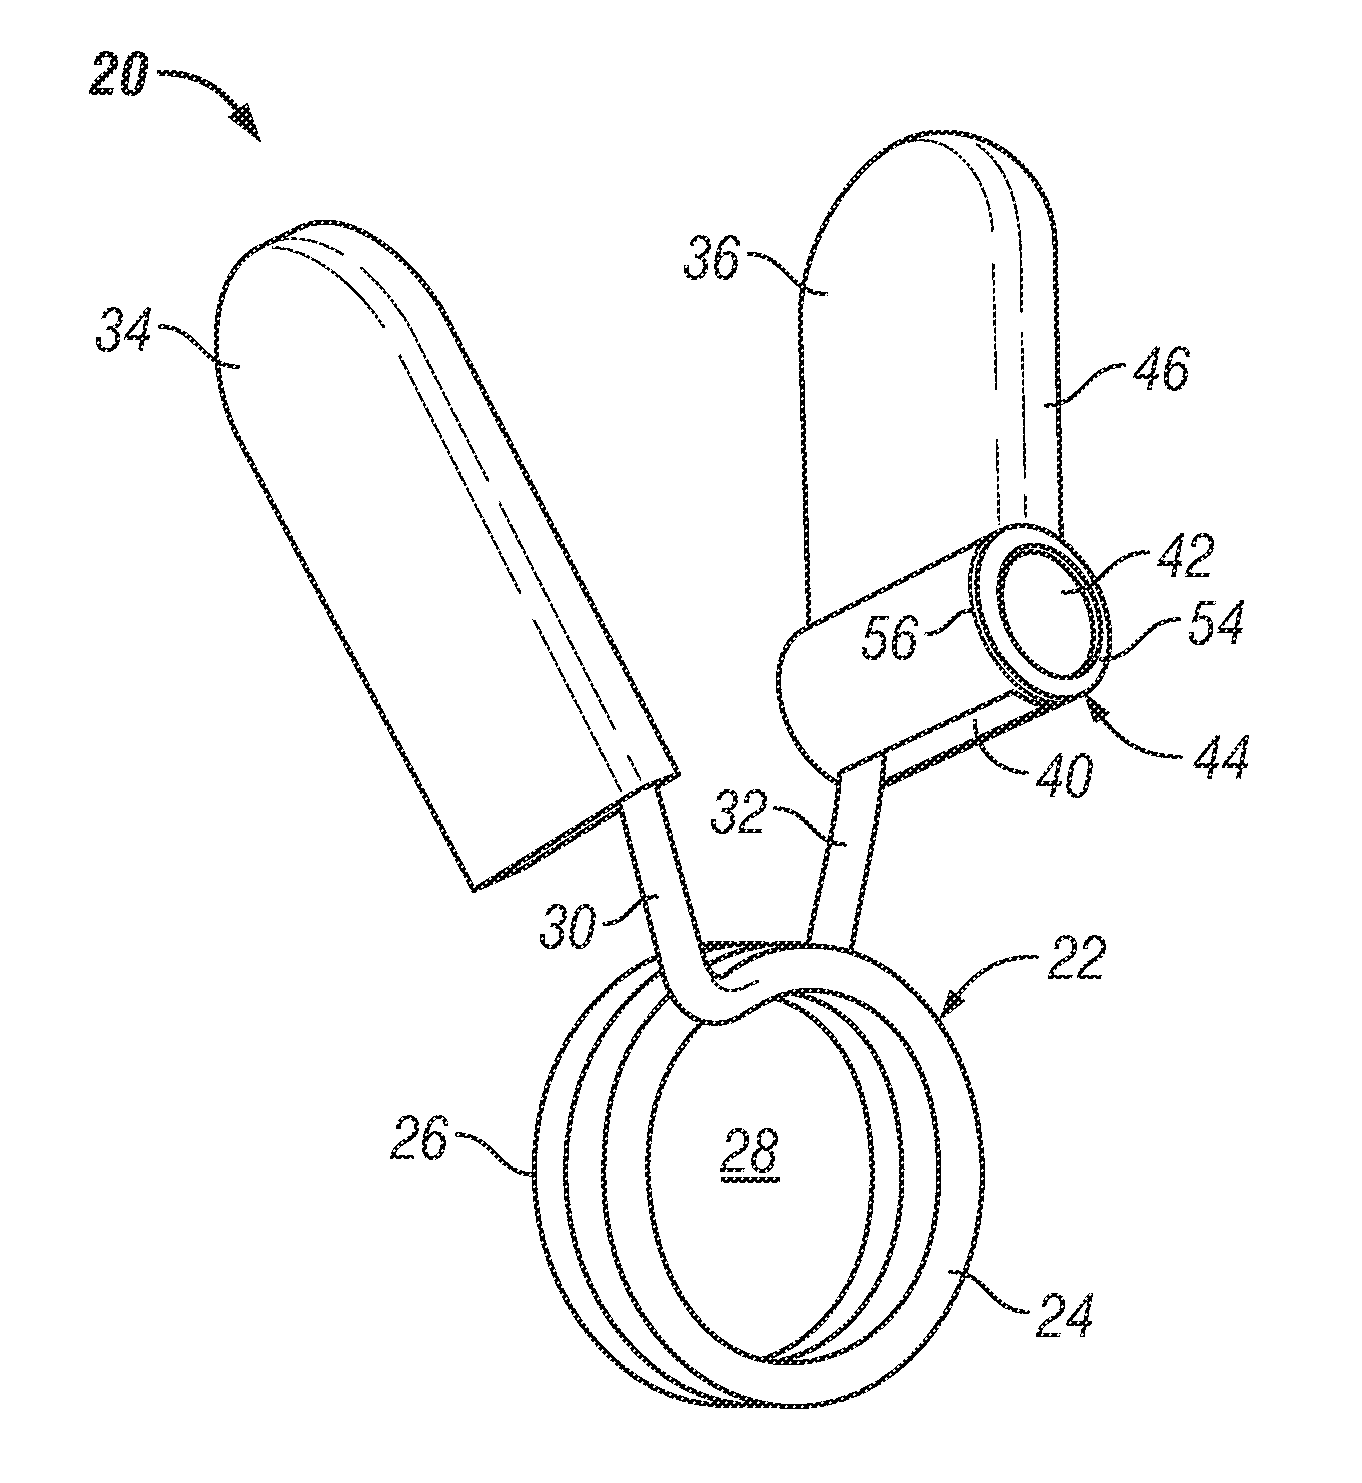 Spring collars and spring collar attachments having permanent magnets and associated methods